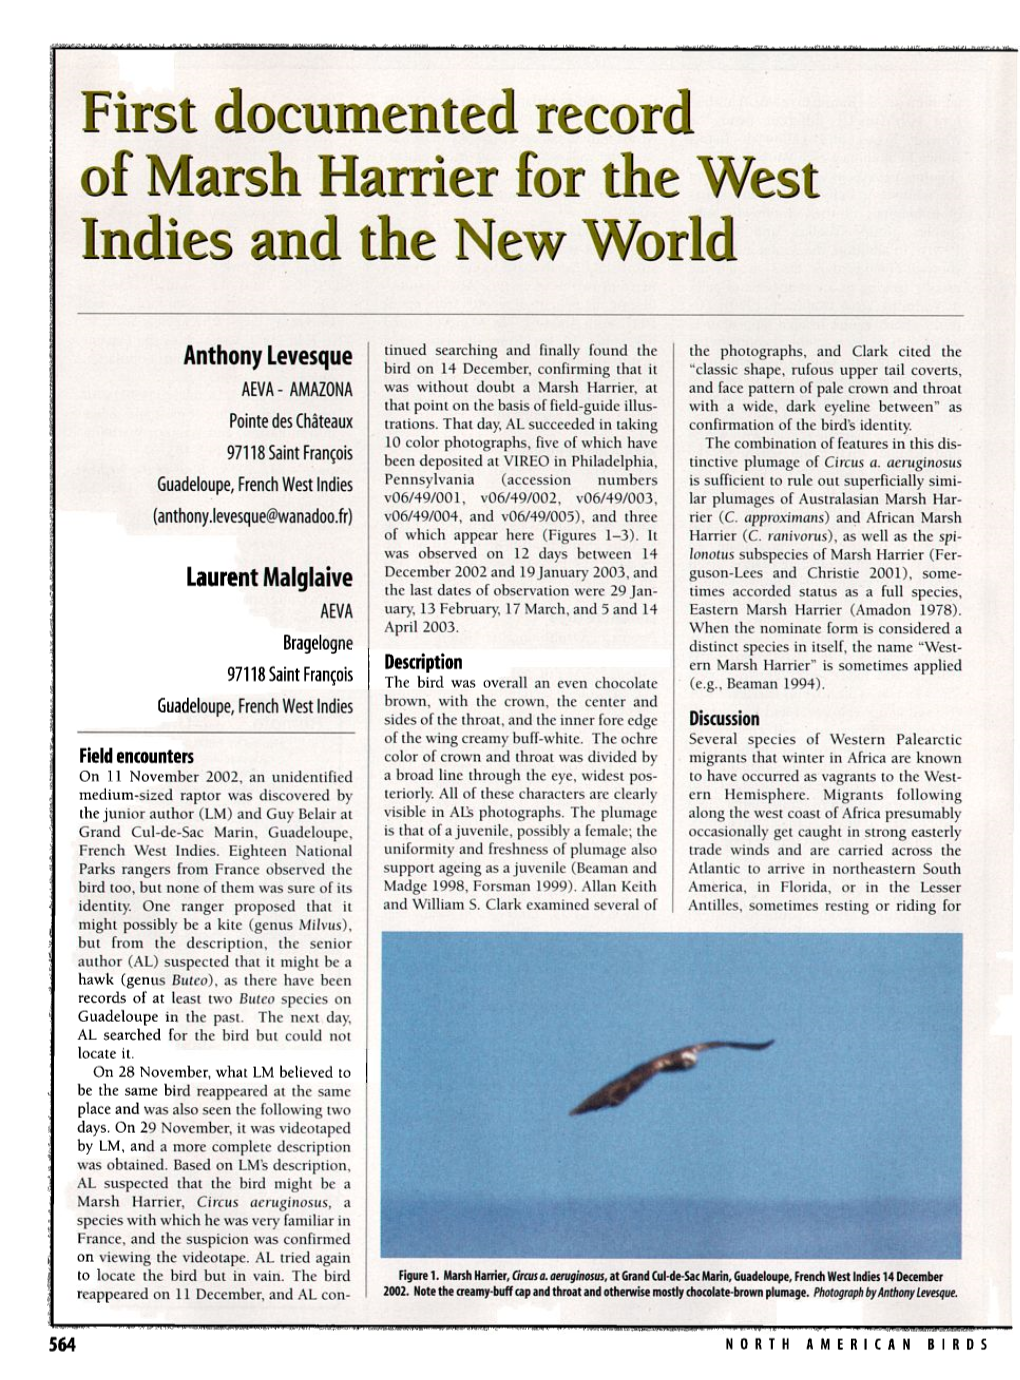 First Documented Record of Marsh Harrier for the West Indies and The